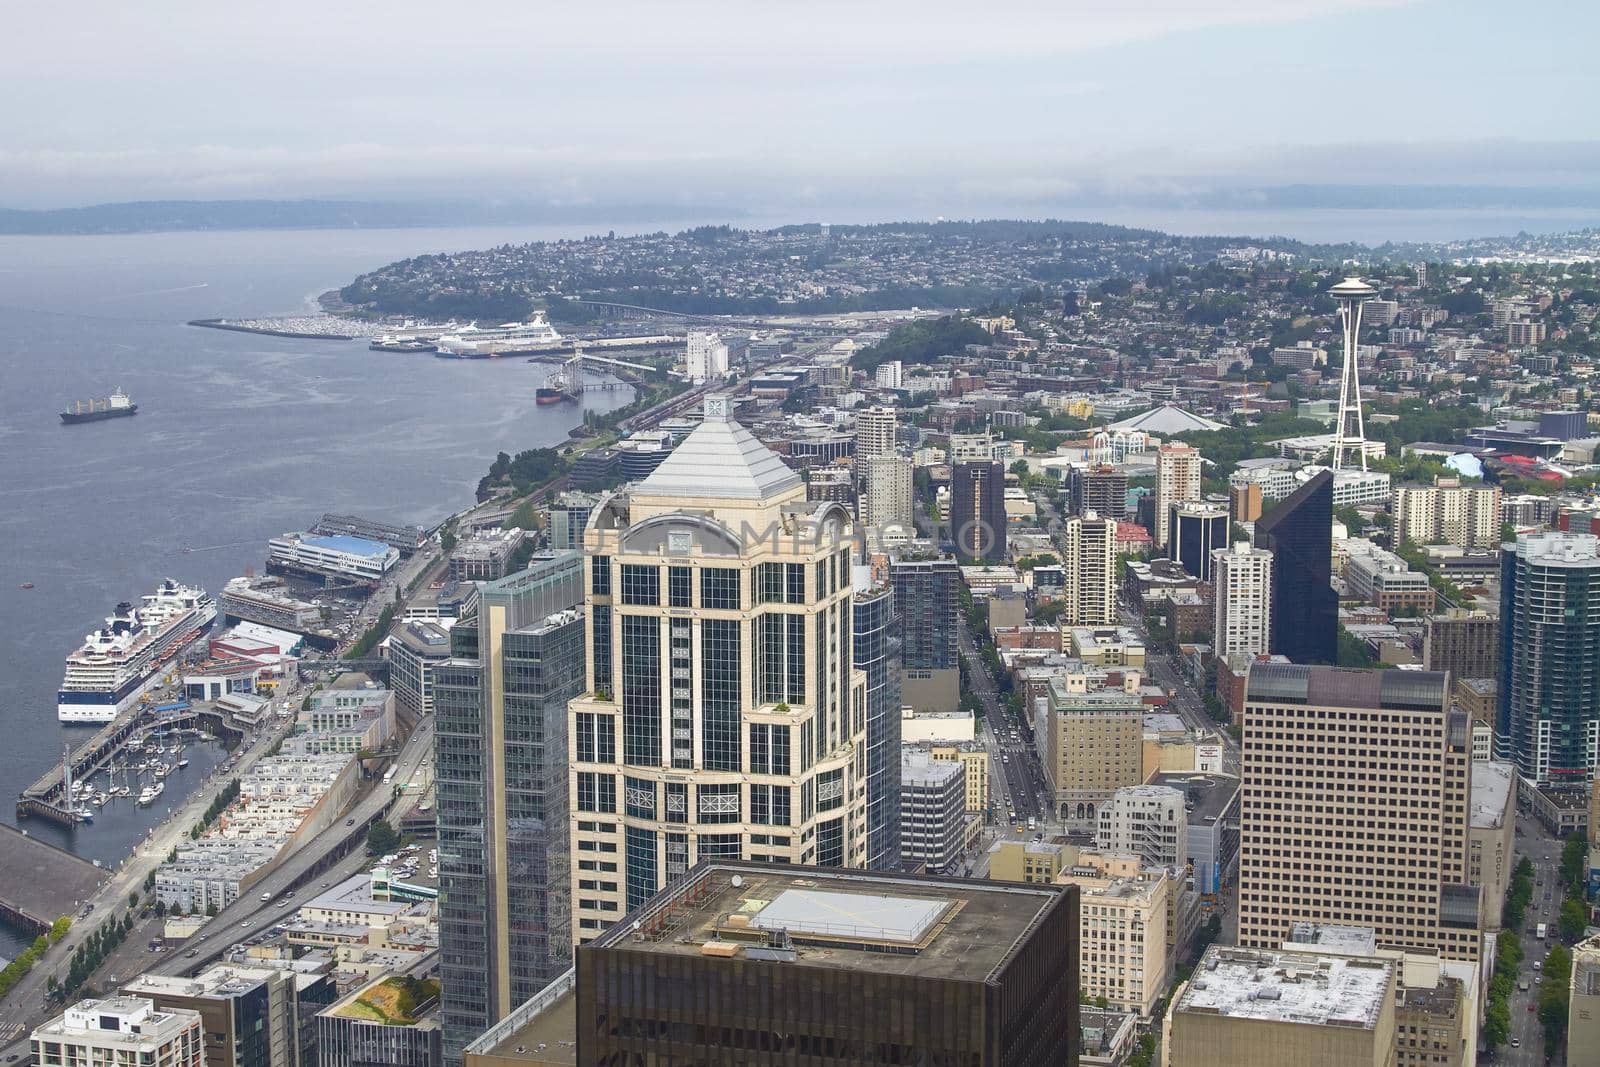 Skyline of Seattle and Space Needle Tower from Columbia Center in Washington, United States.